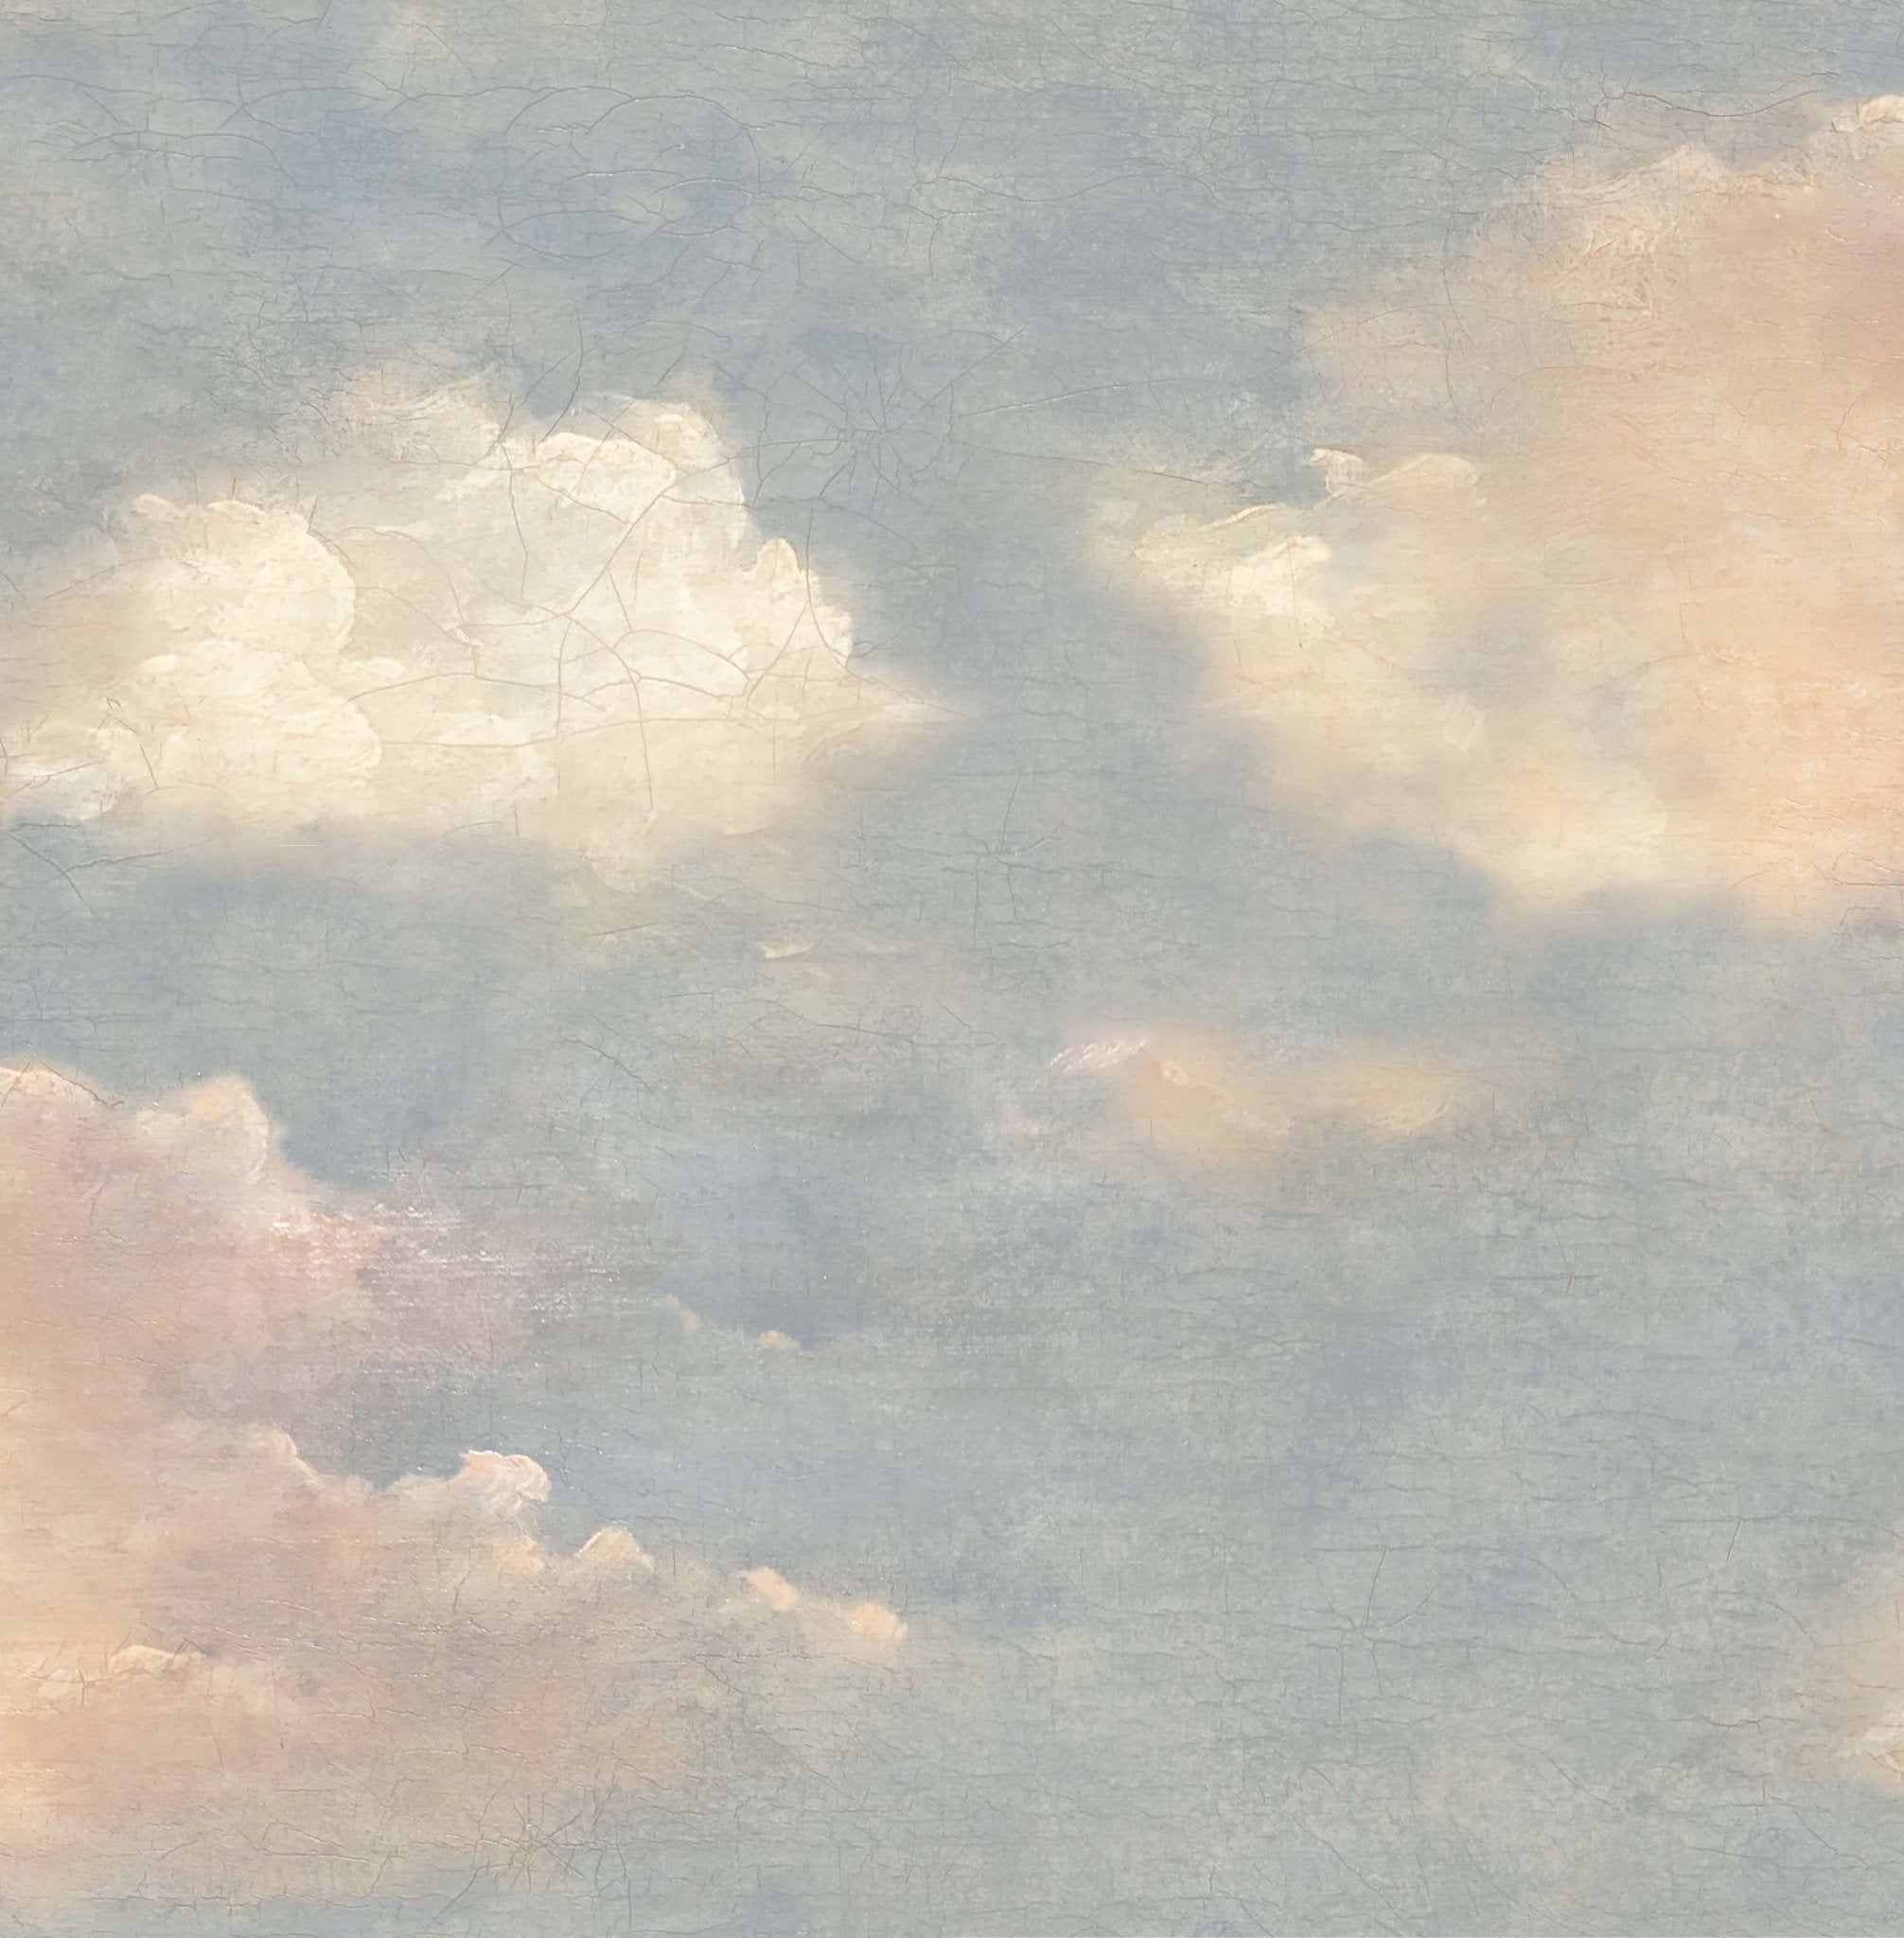 50 Aesthetic Cloud Wallpaper Ideas For Your Phone